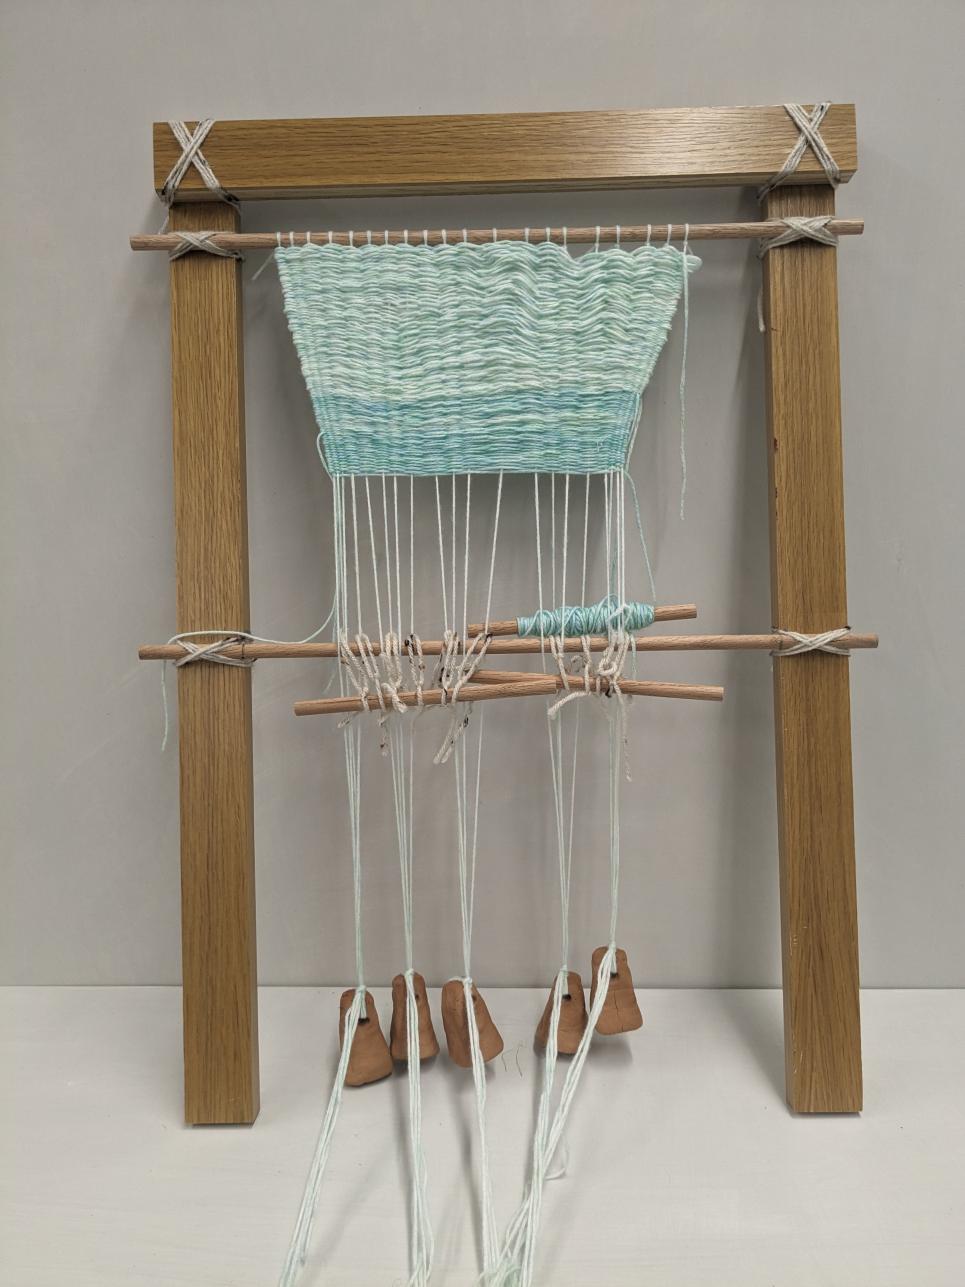 Full-sized recreation of an ancient Greek loom